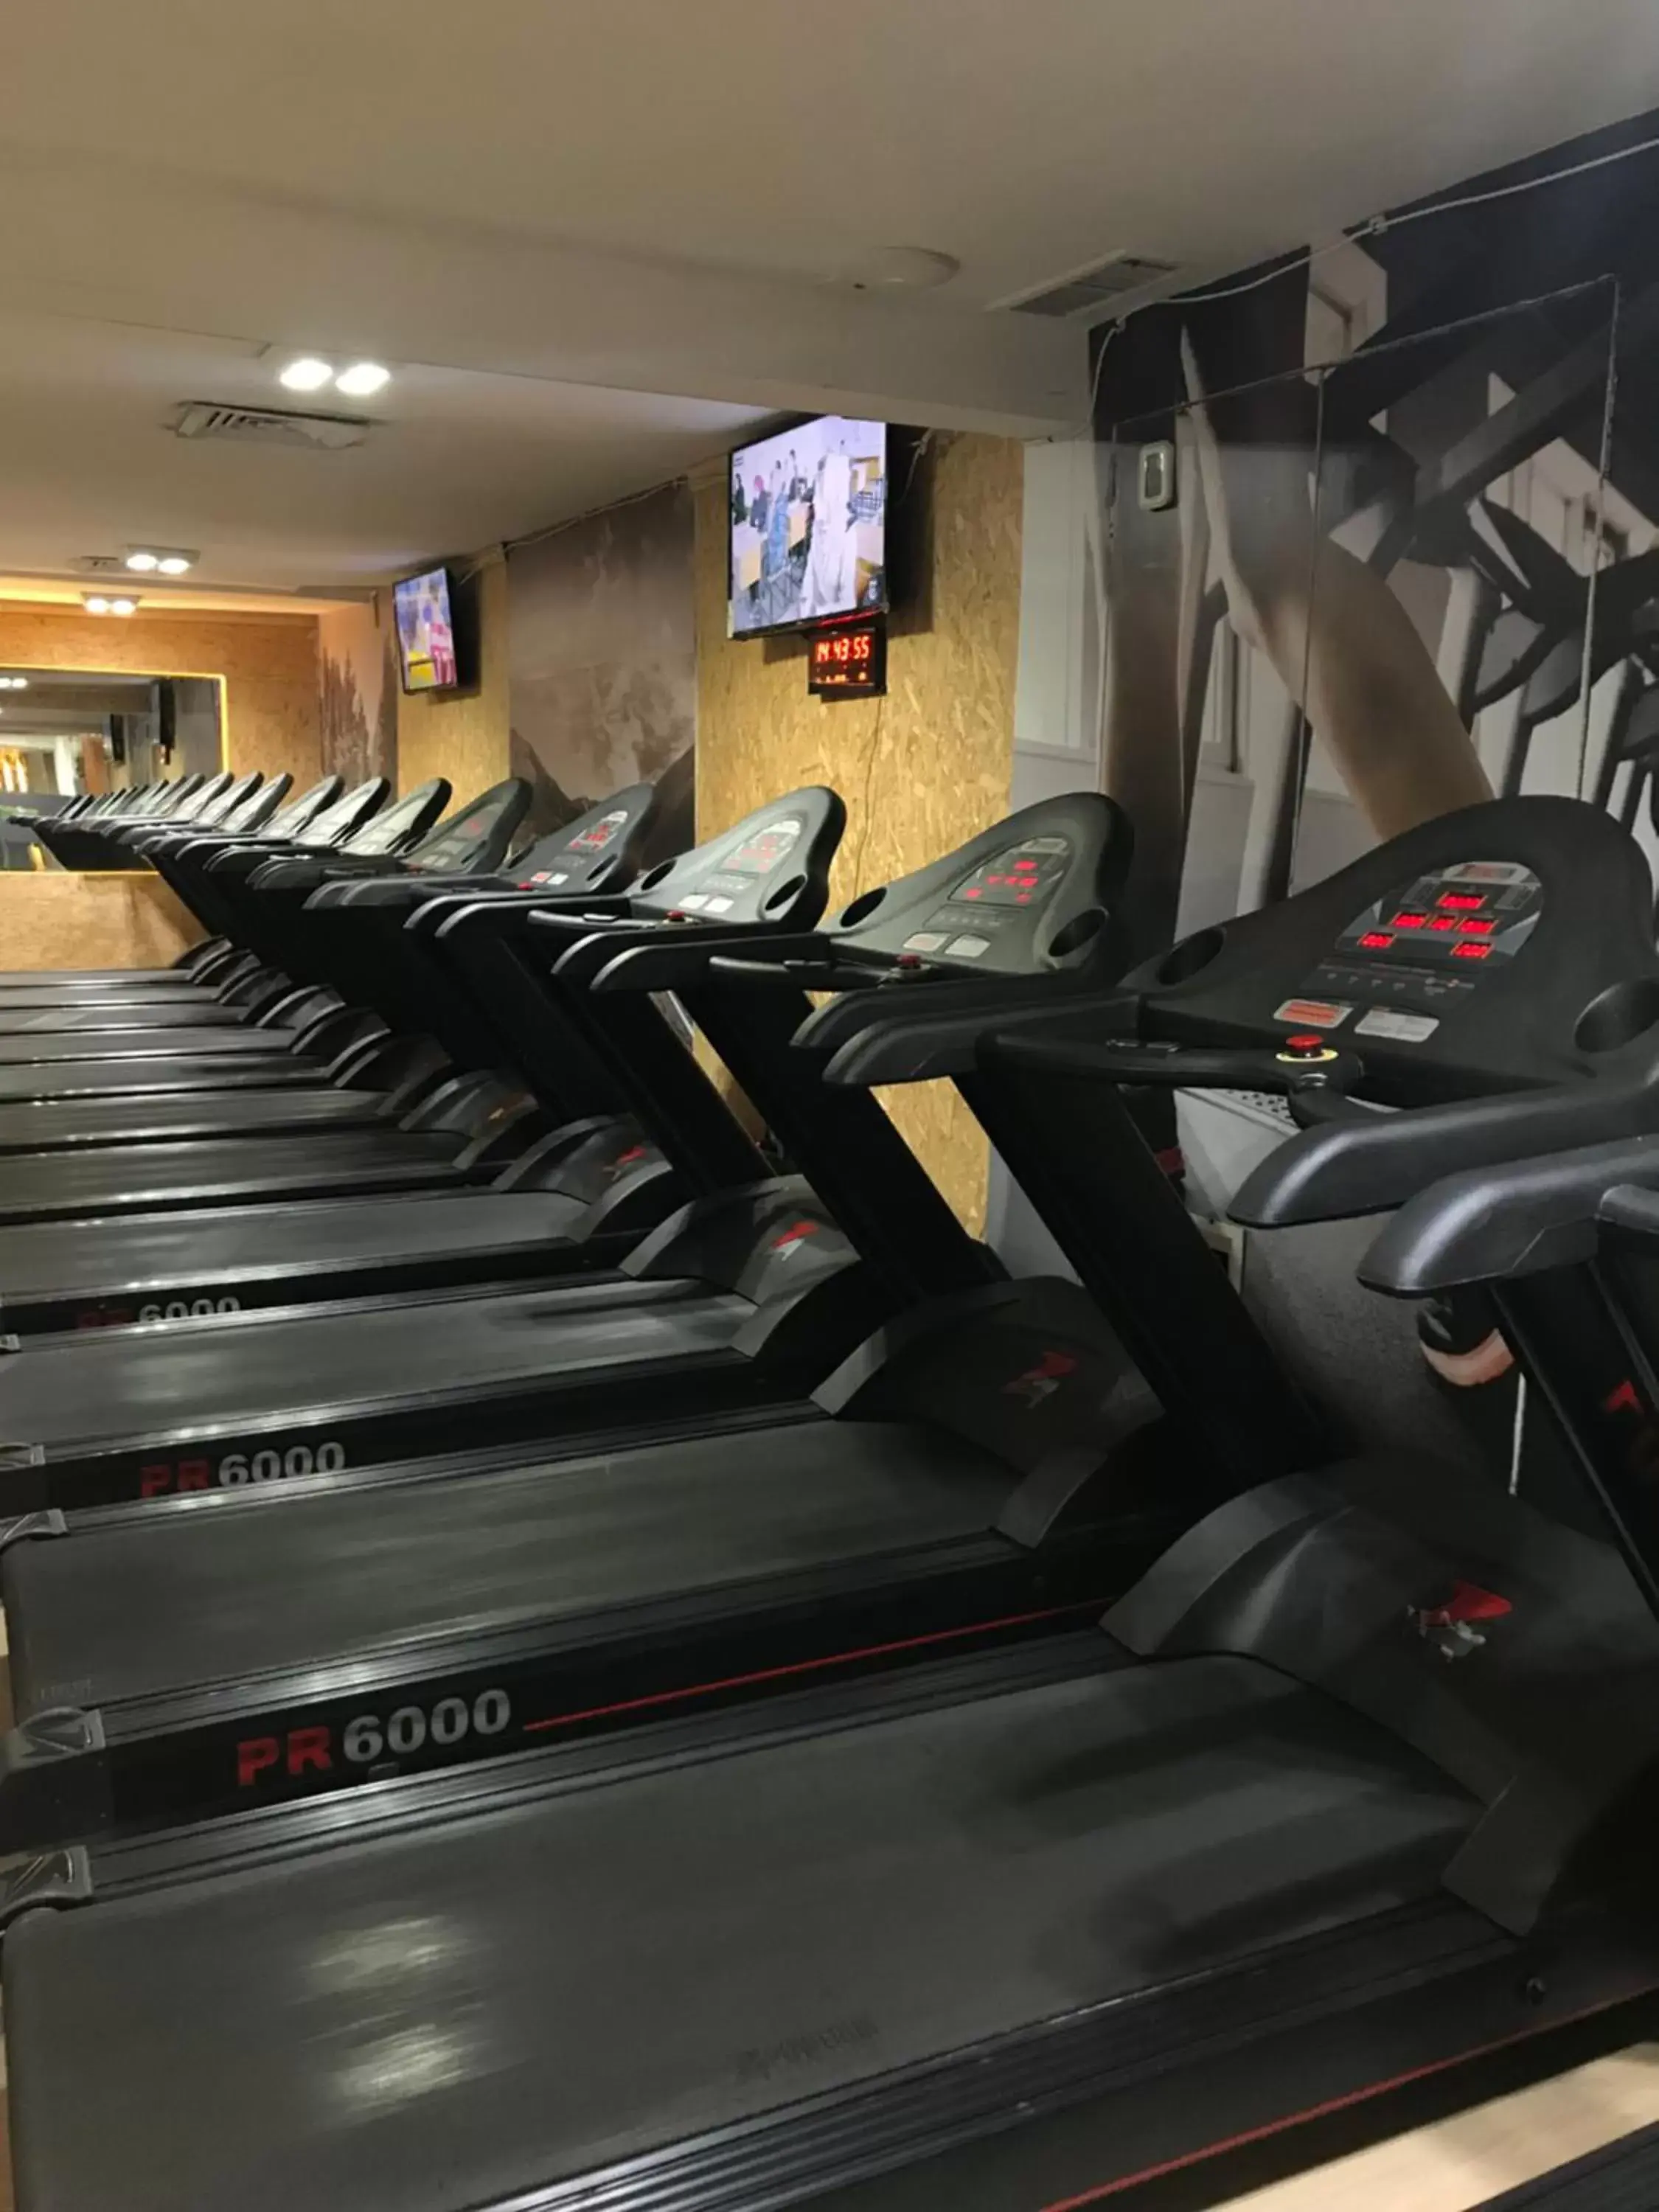 Fitness centre/facilities in Rio Othon Palace